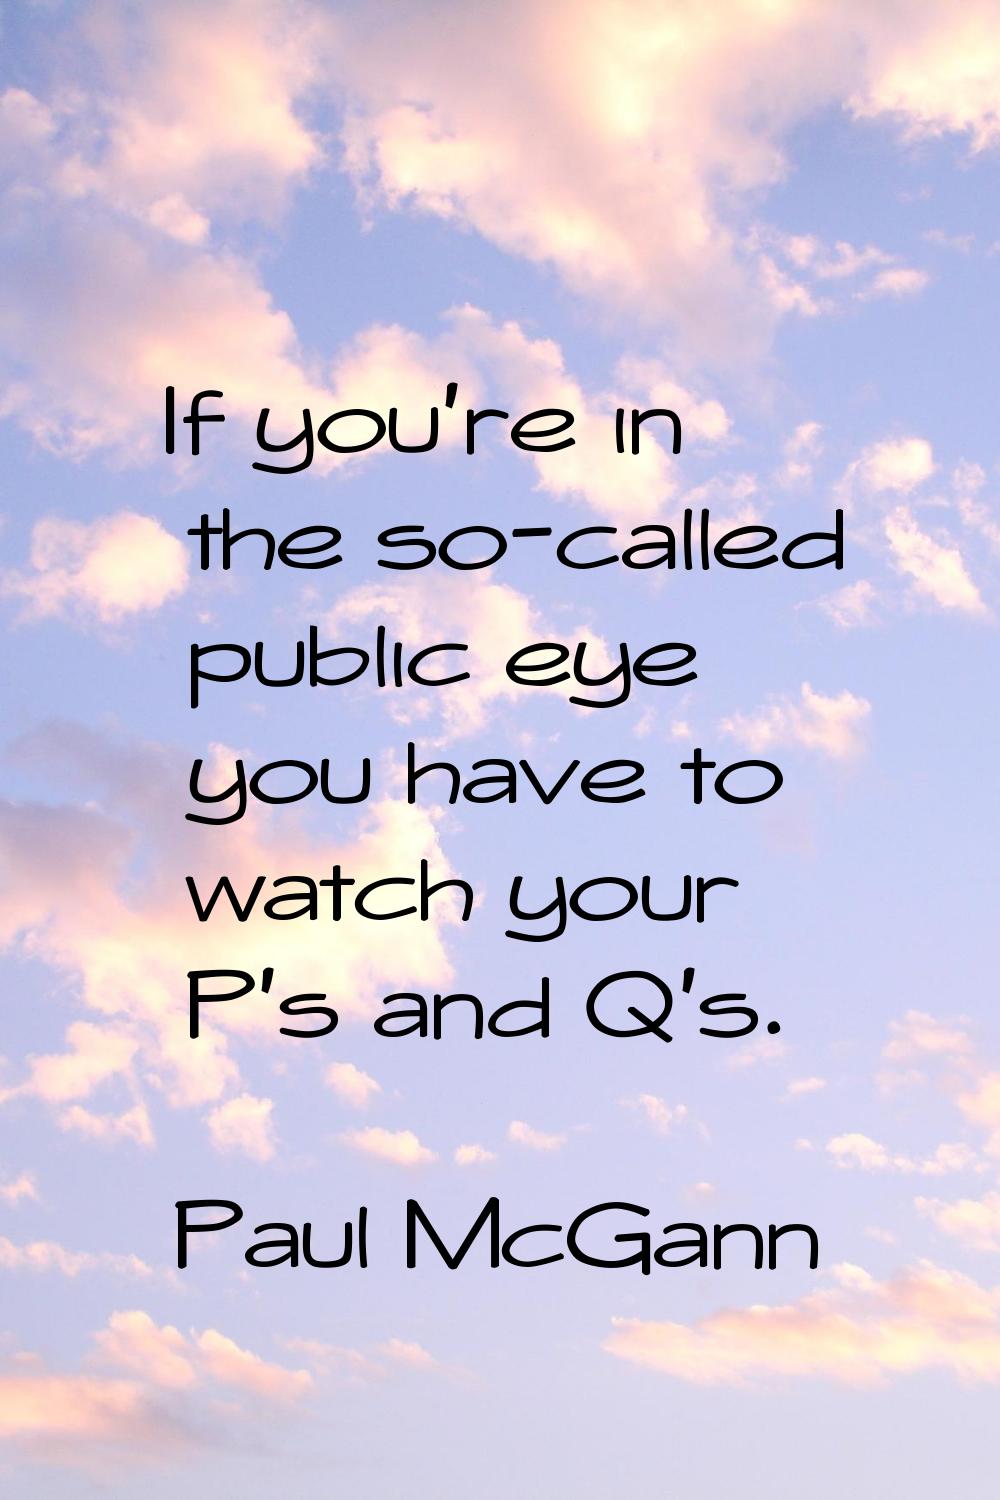 If you're in the so-called public eye you have to watch your P's and Q's.